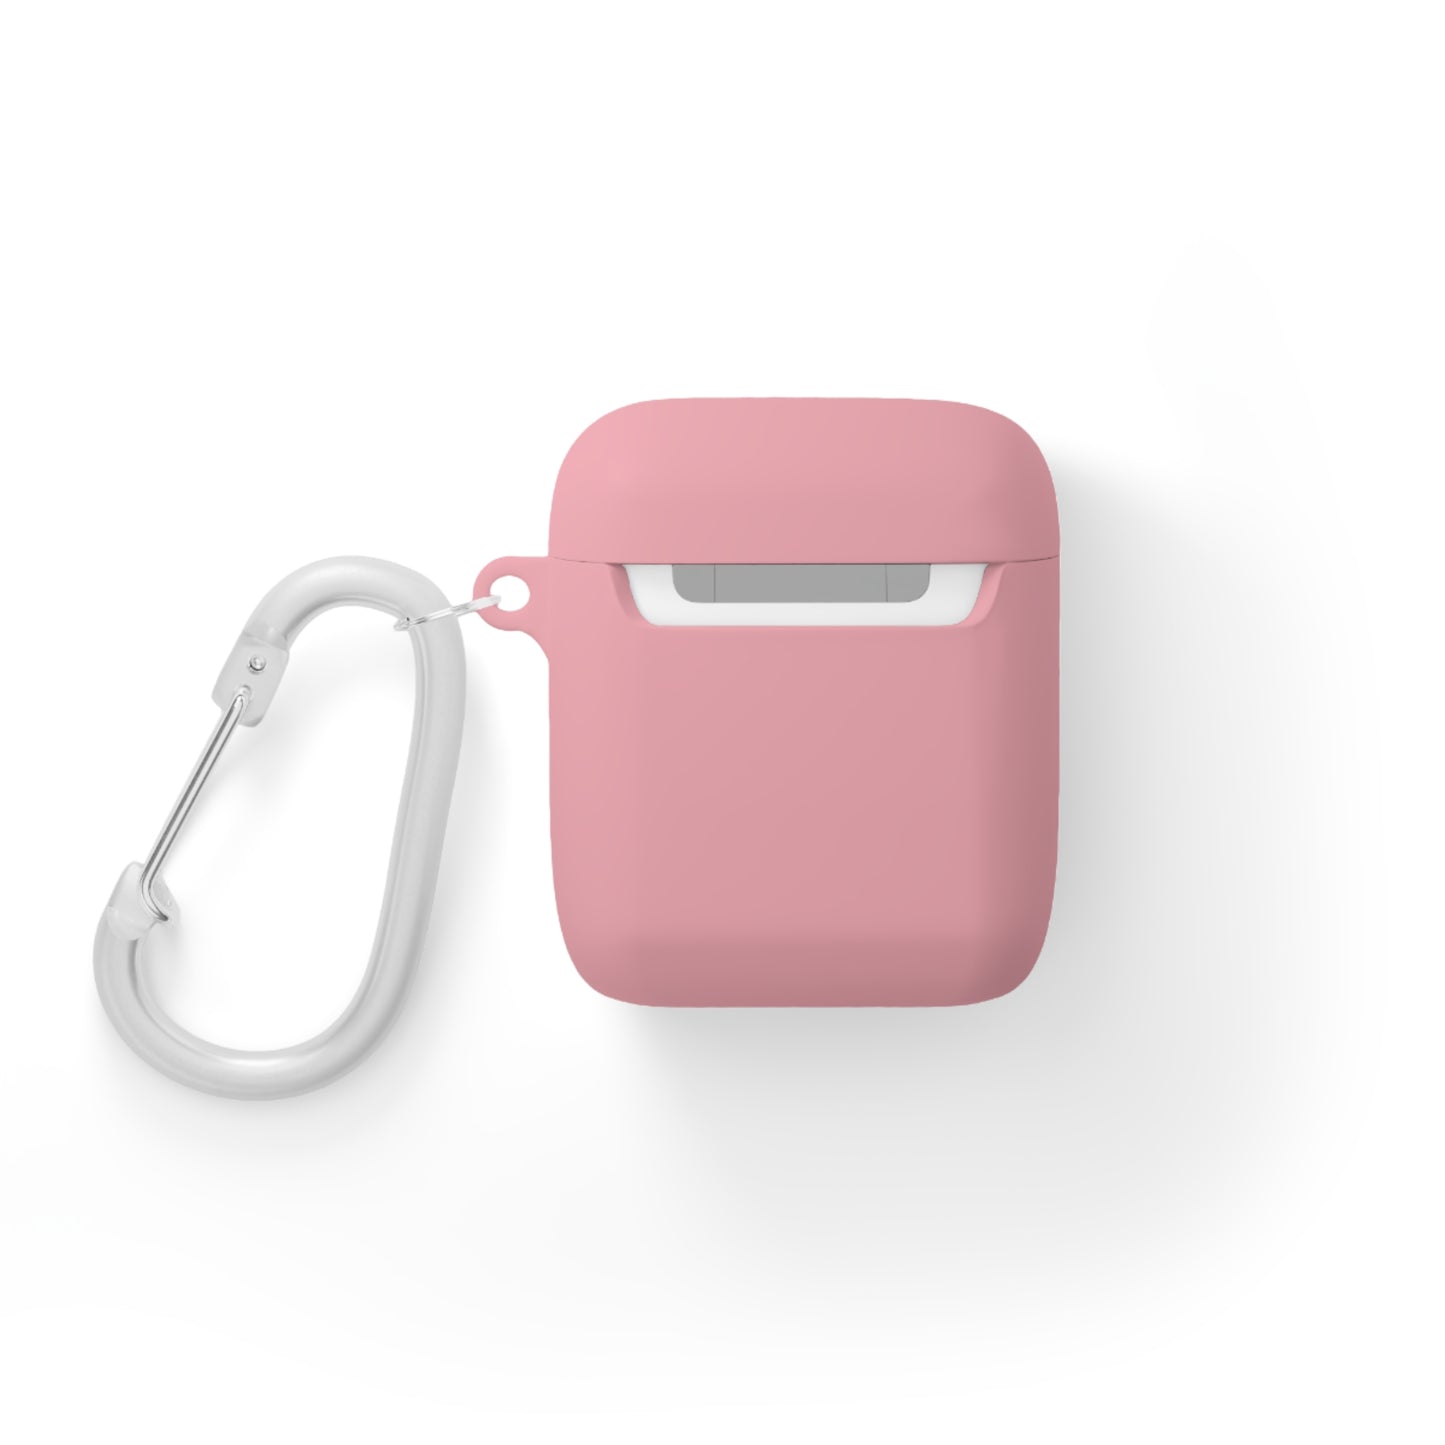 Exclusive Challenger Silhouette AirPods Case: Rev Up Your Style!